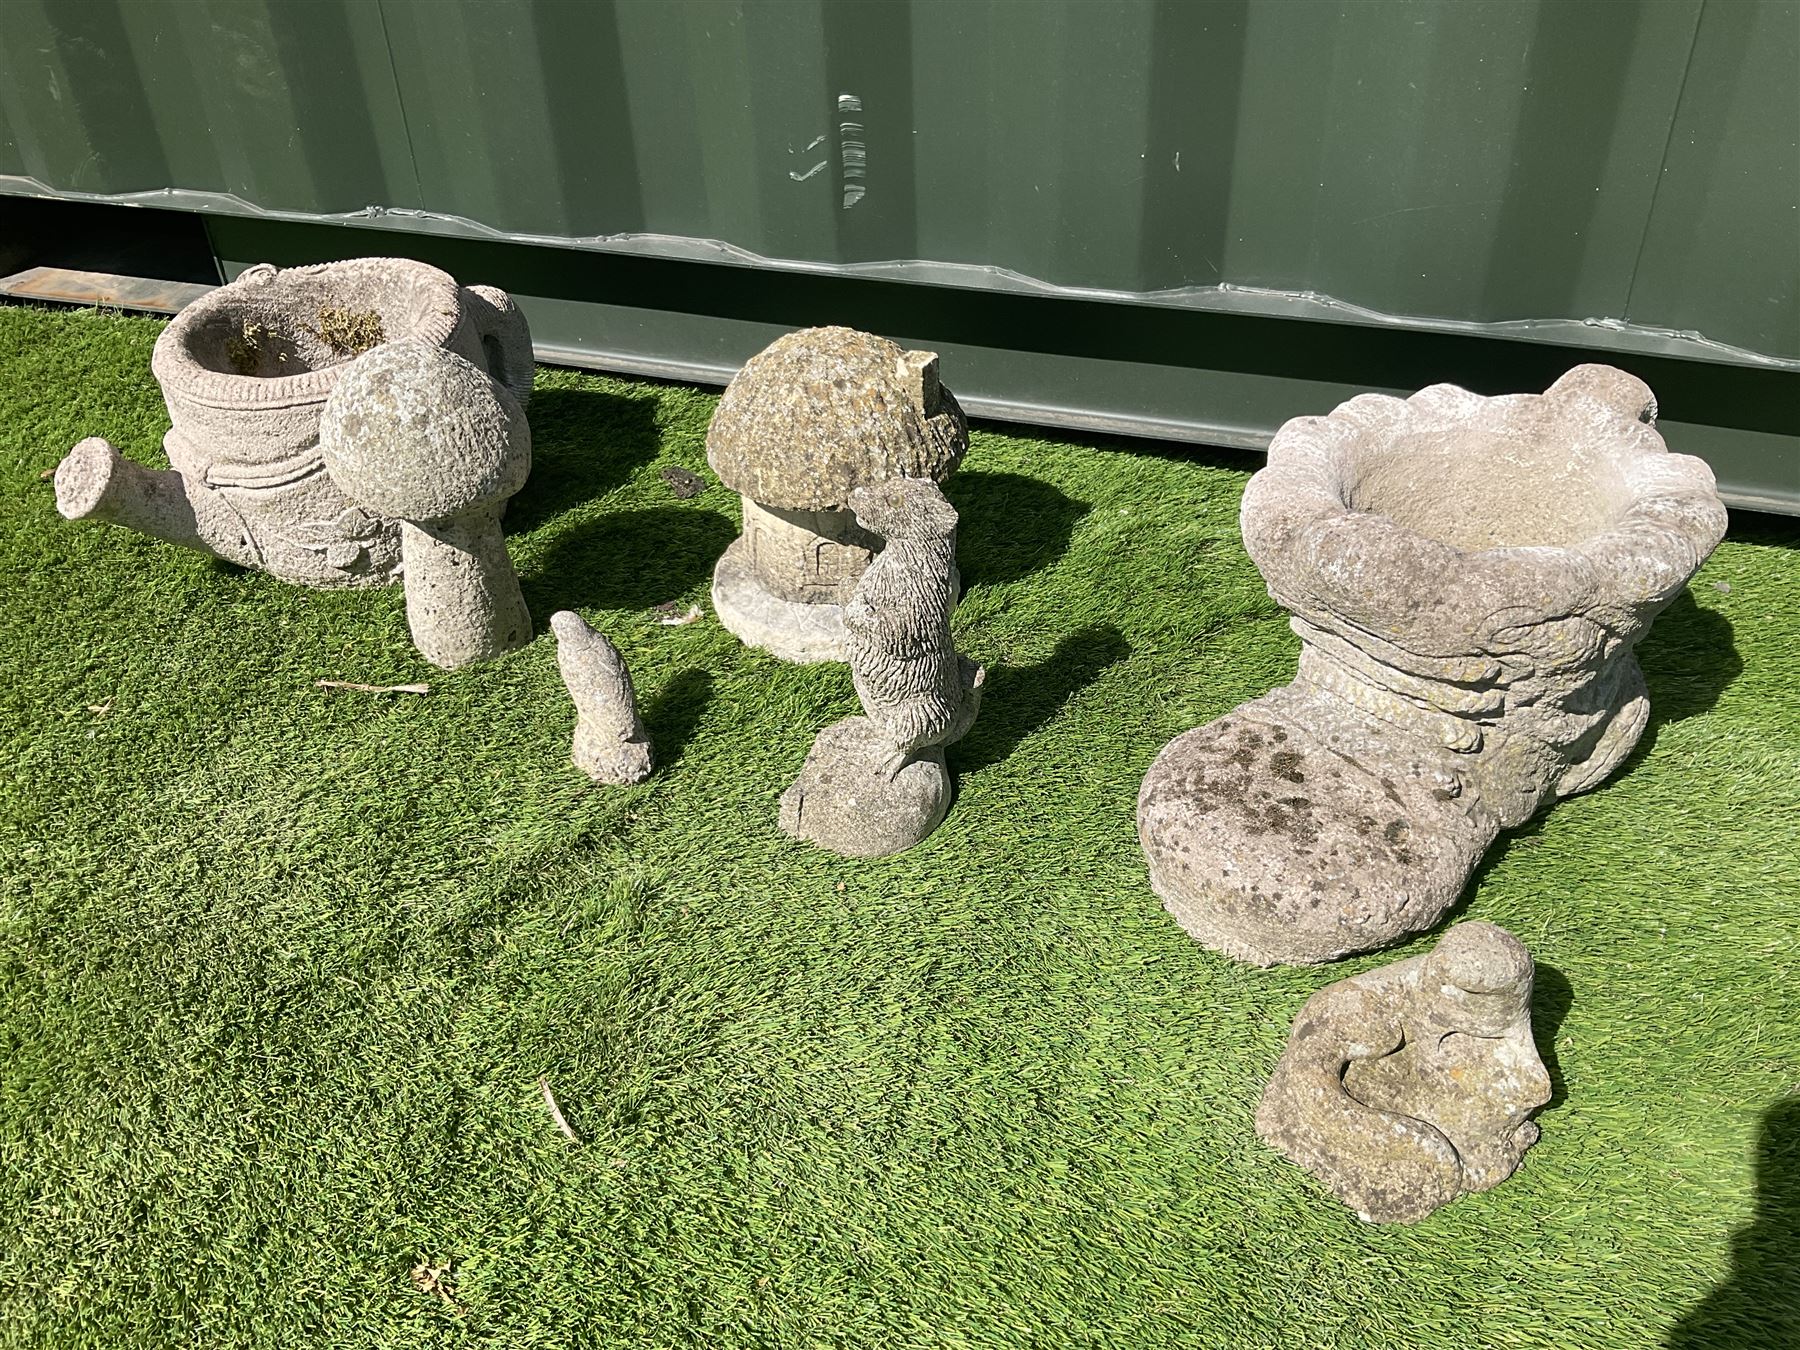 Cast stone planters in shape of a boot - Image 3 of 4